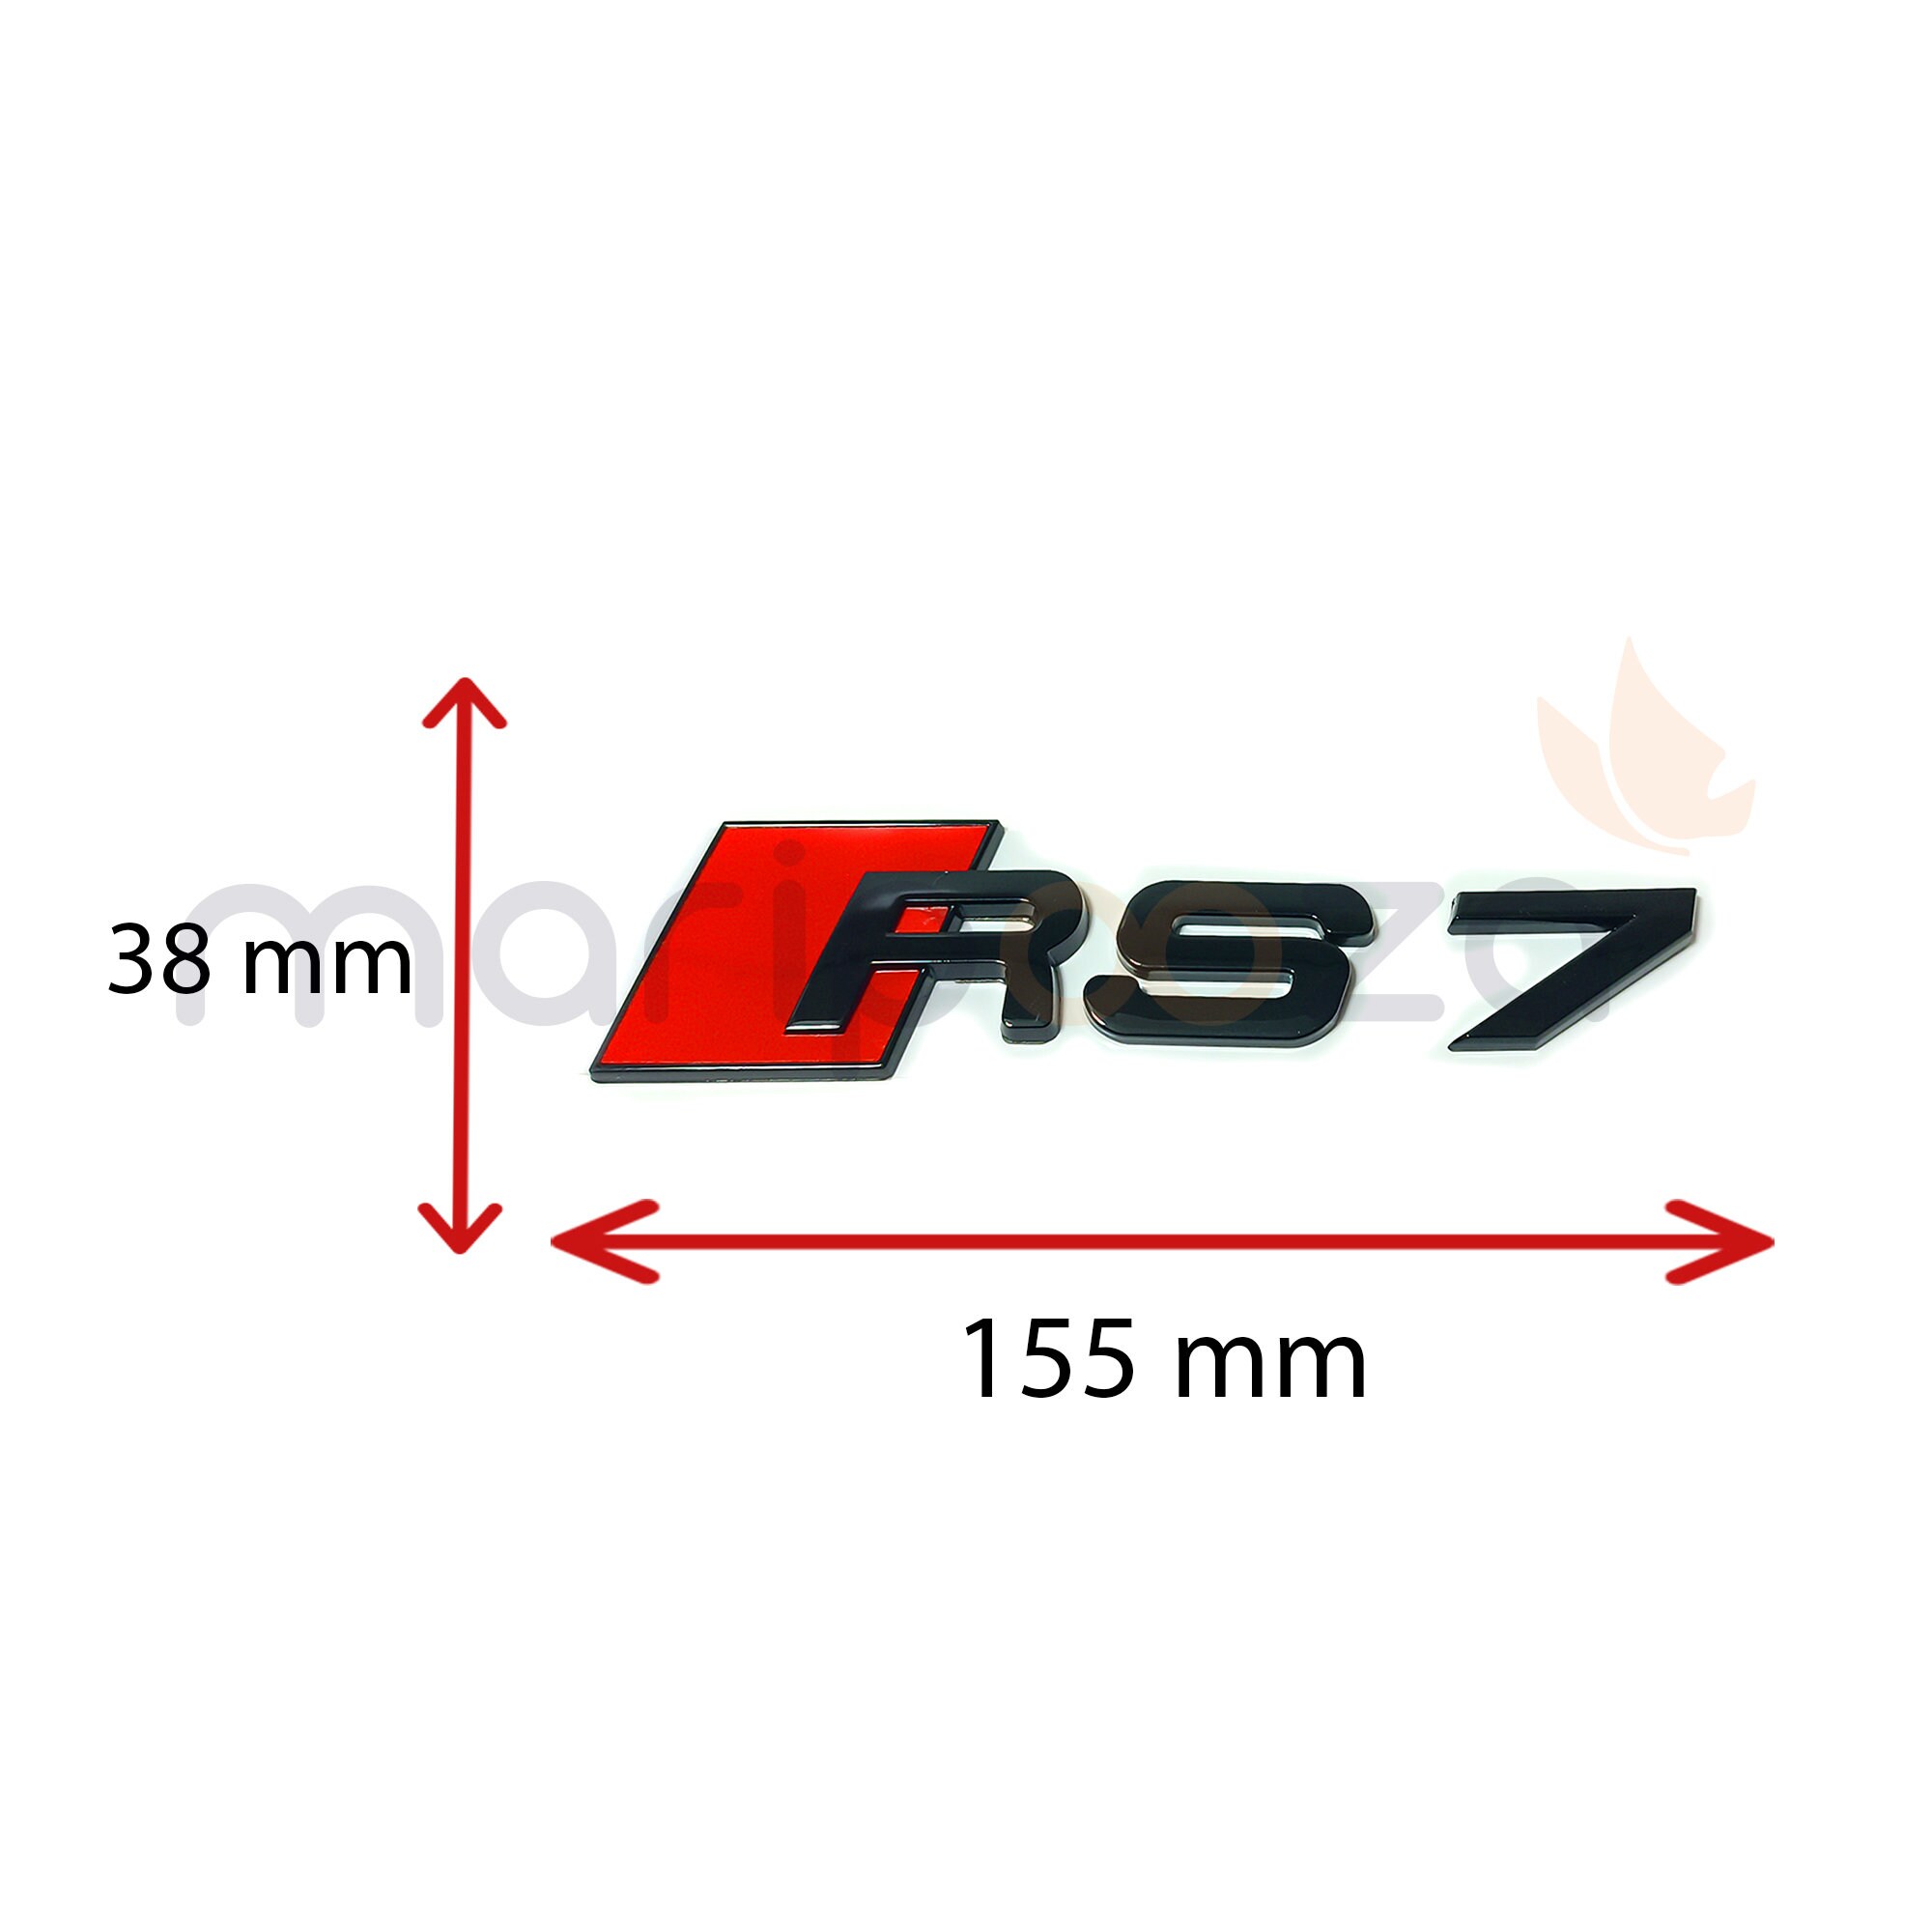 RS7 Glossy Black Rear Trunk Emblem Logo for Audi A7 S7 RS7 - Etsy